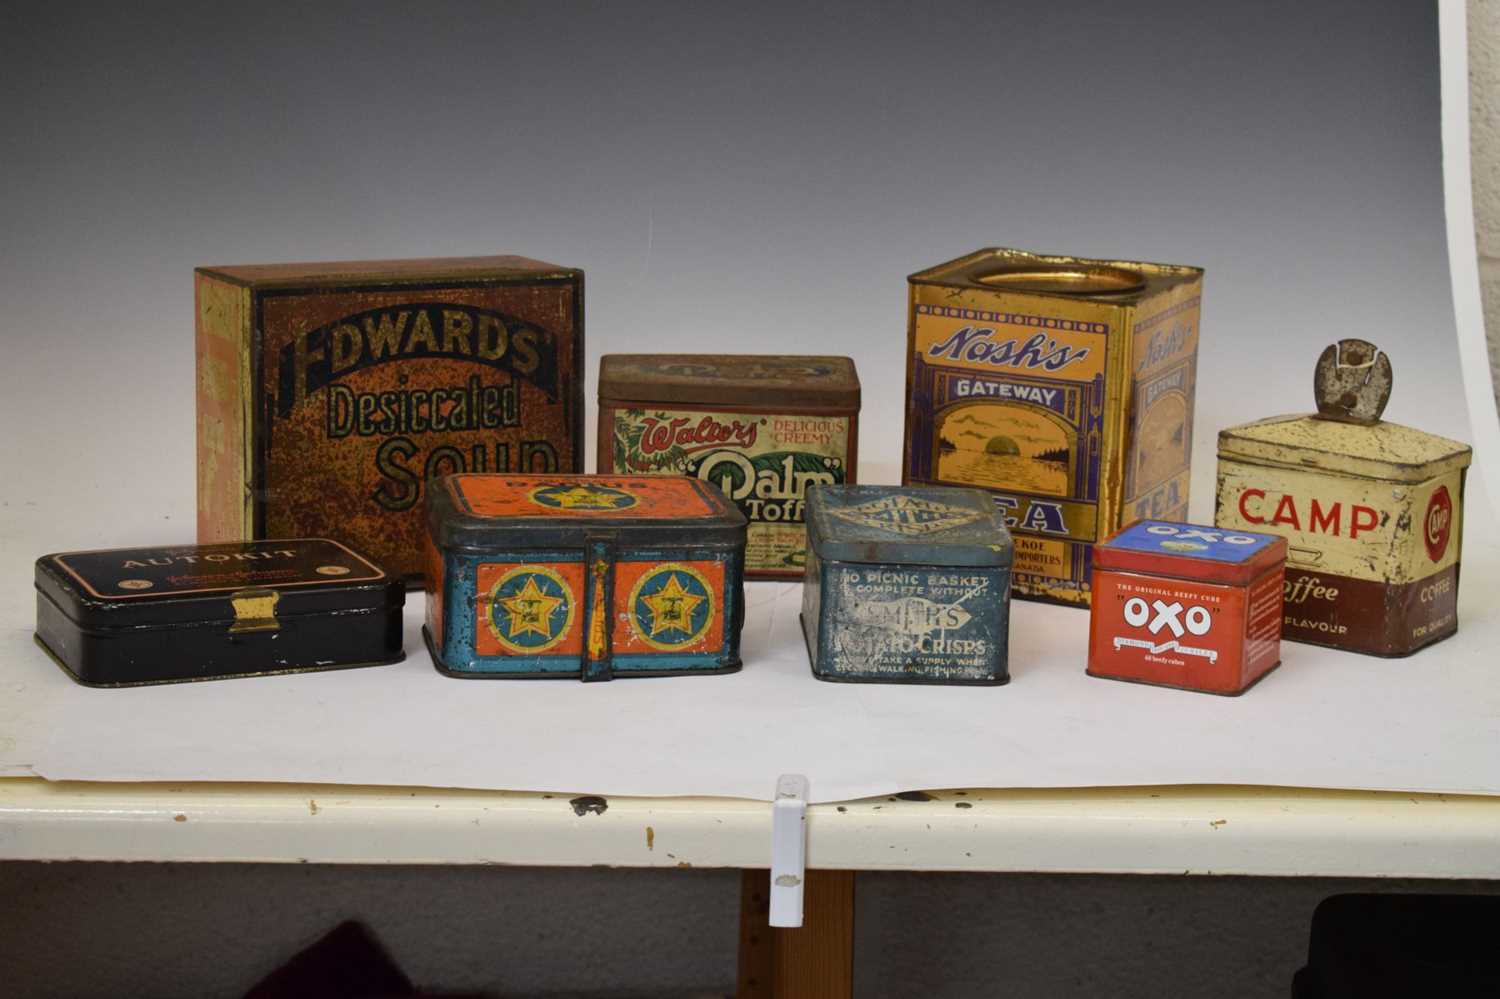 'Radius' Primus stove, together with advertising tins - Image 2 of 8